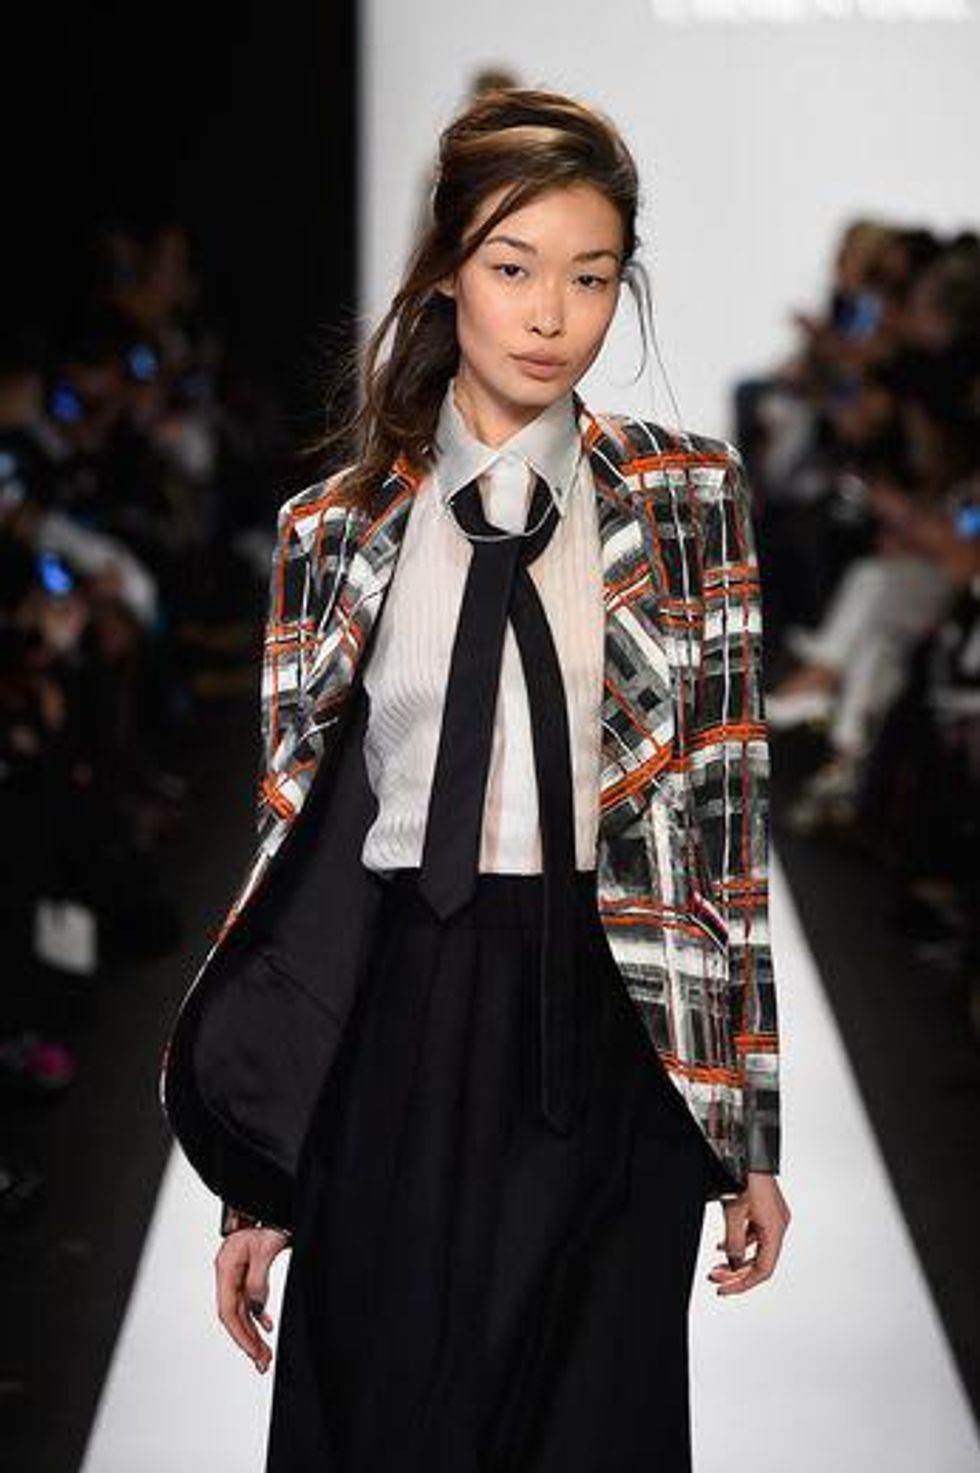 Naughty school girl look from Carmen Marc Valvo fall 2015 collection